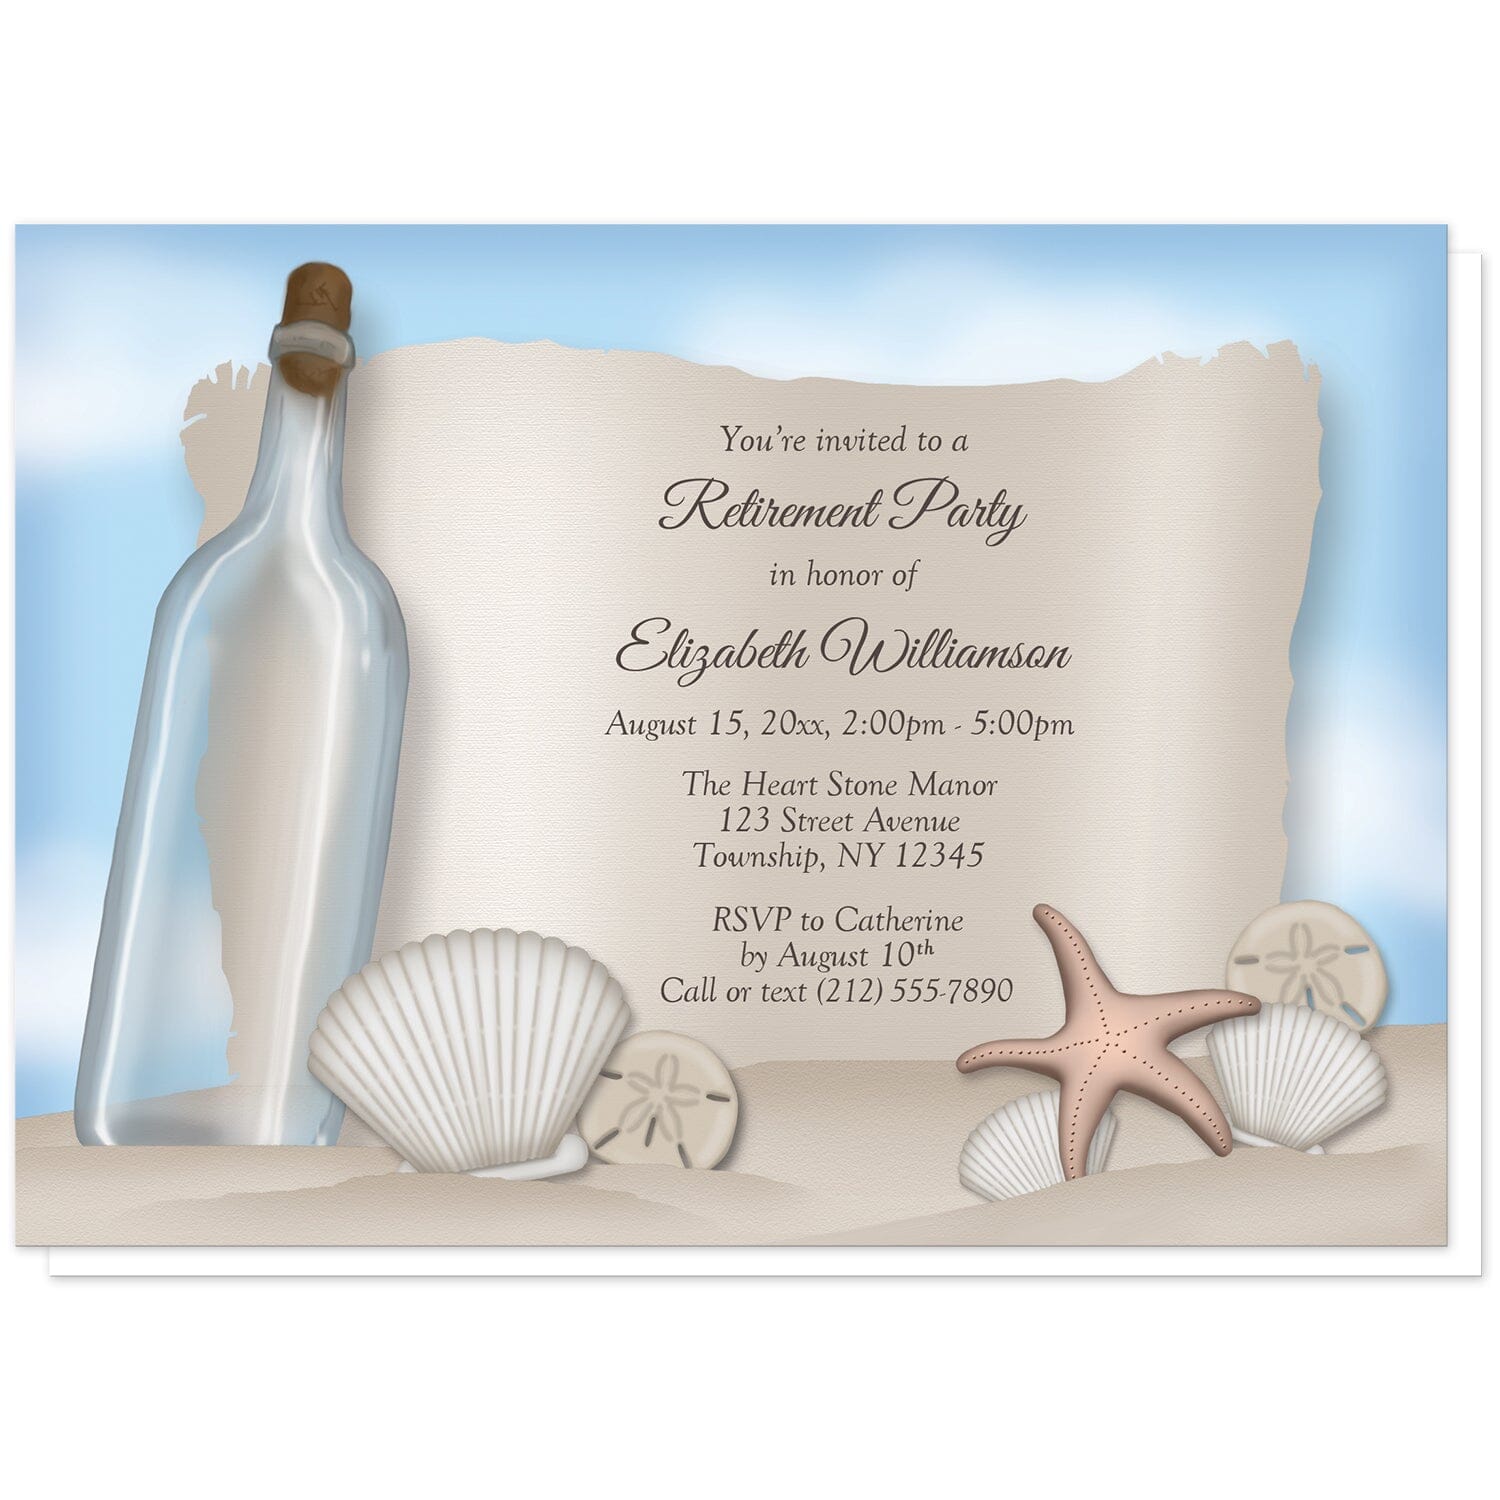 Message from a Bottle Beach Retirement Invitations at Artistically Invited. Message from a bottle beach retirement invitations with an "on the beach" and "message from a bottle" theme. They're designed with an illustrated empty glass bottle, a paper message area, beige sand, a blue sky, and assorted seashells. Your personalized retirement party details are custom printed in brown over the paper illustration.